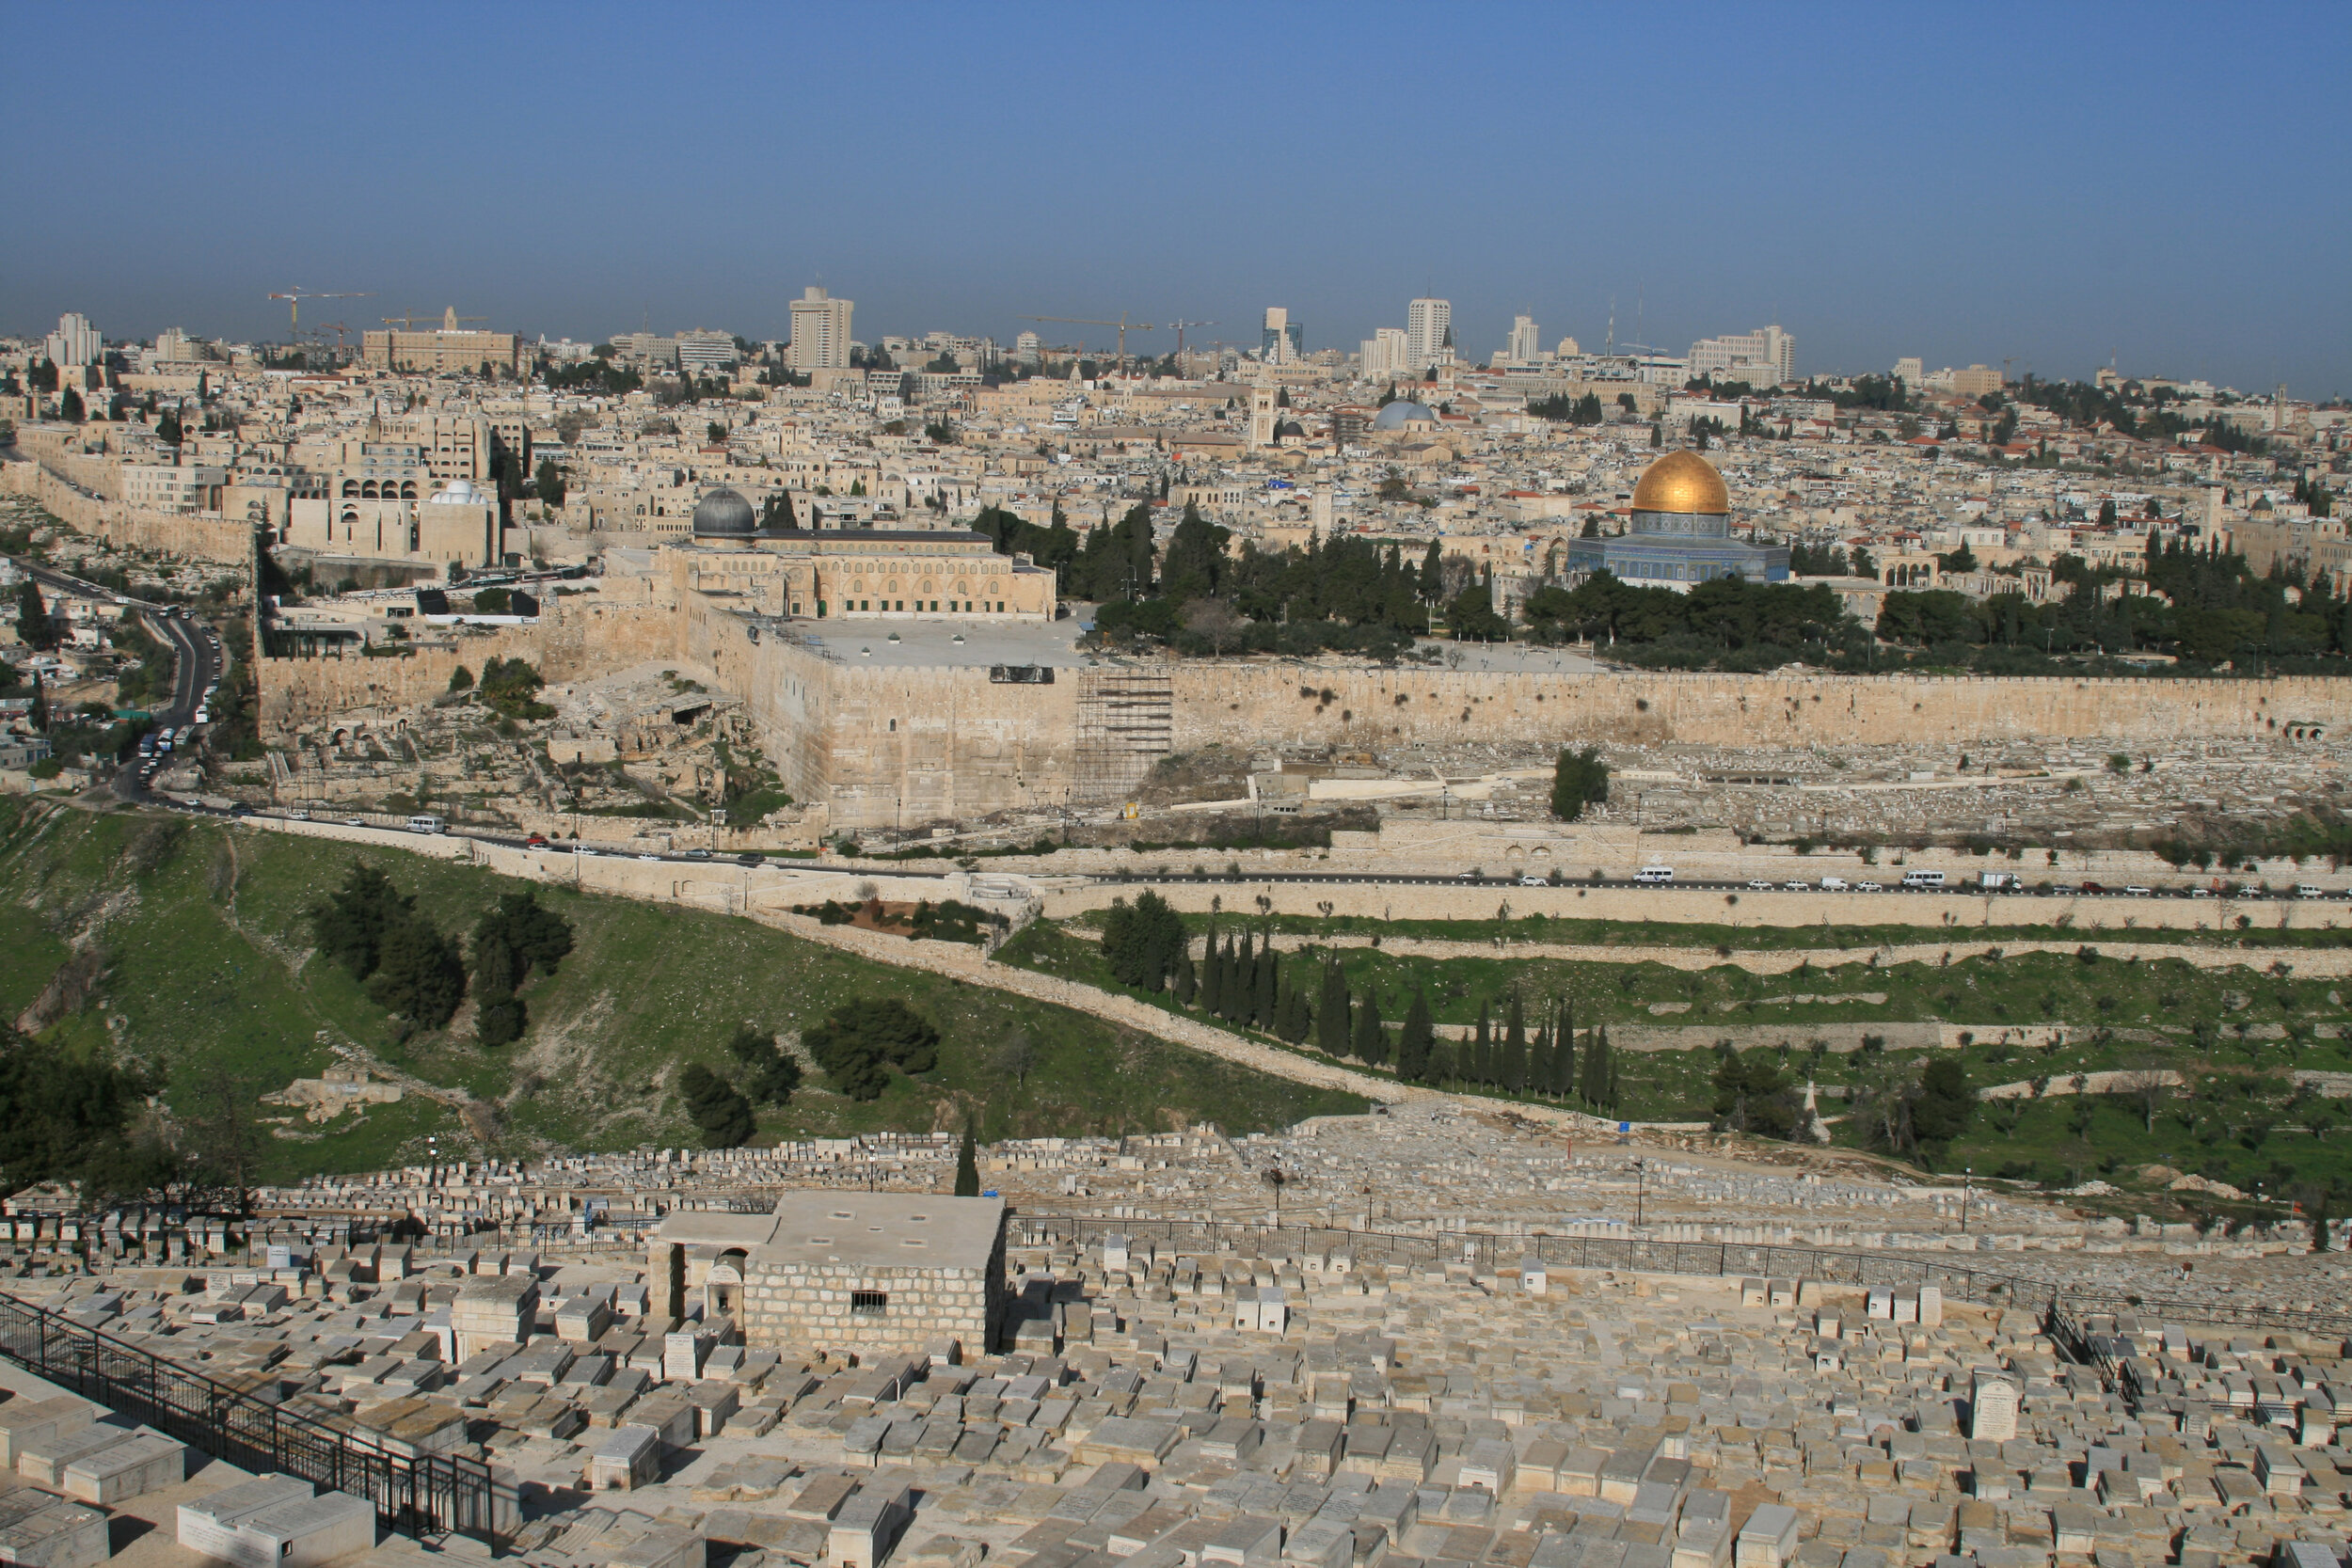  Looking down from the Mt. of Olives, Jerusalem         